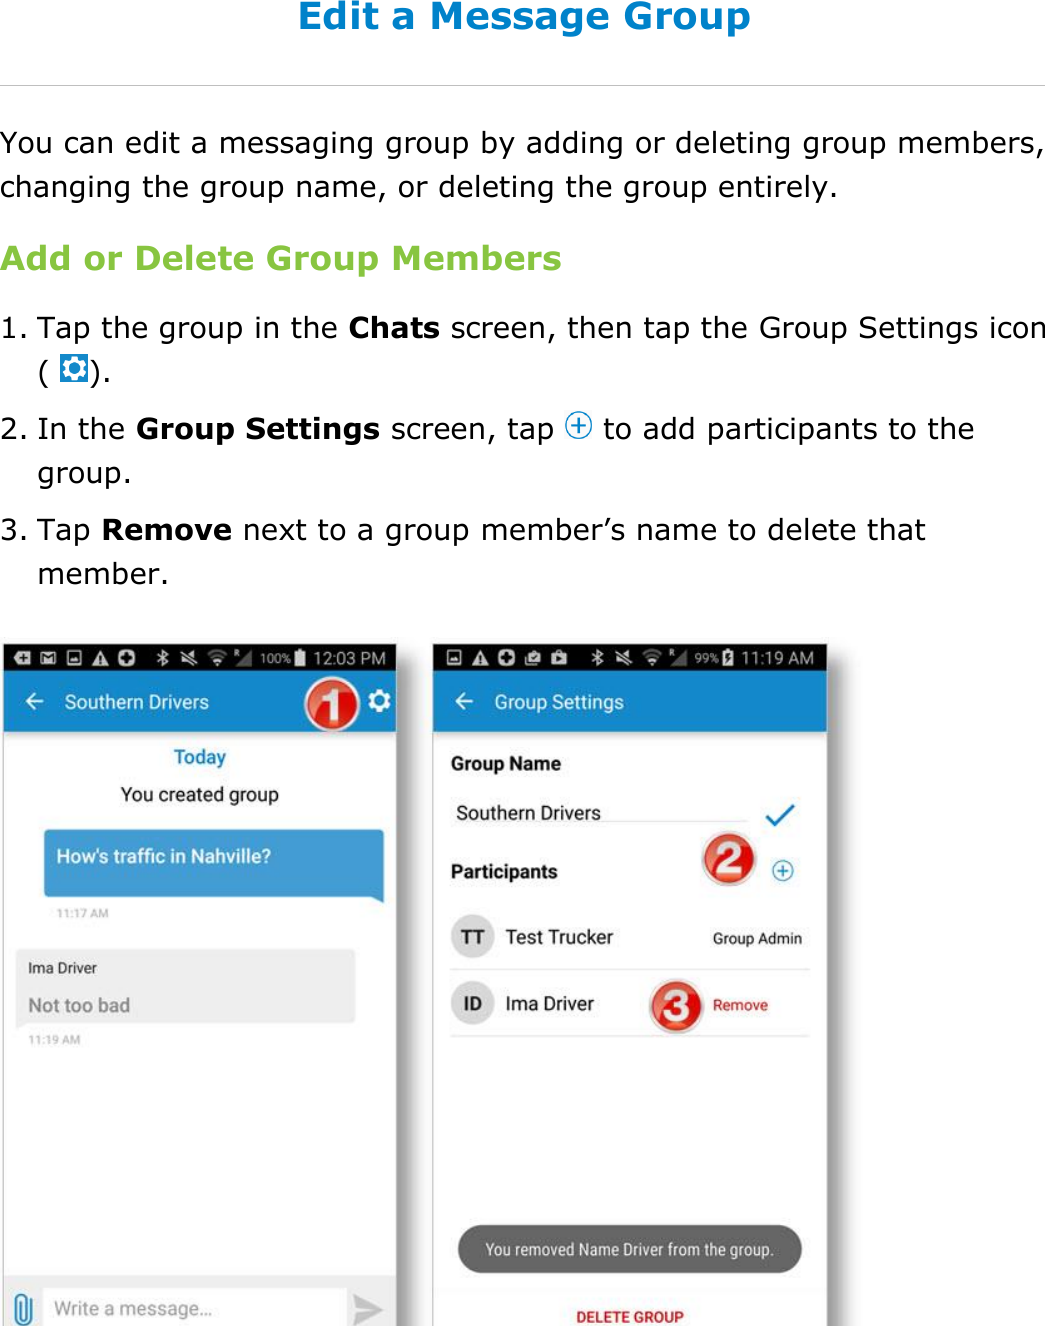 Send Messages, Forms, and Workflows DriverConnect User Guide  73 © 2016-2017, Rand McNally, Inc. Edit a Message Group You can edit a messaging group by adding or deleting group members, changing the group name, or deleting the group entirely. Add or Delete Group Members 1. Tap the group in the Chats screen, then tap the Group Settings icon (  ). 2. In the Group Settings screen, tap   to add participants to the group. 3. Tap Remove next to a group member’s name to delete that member.    